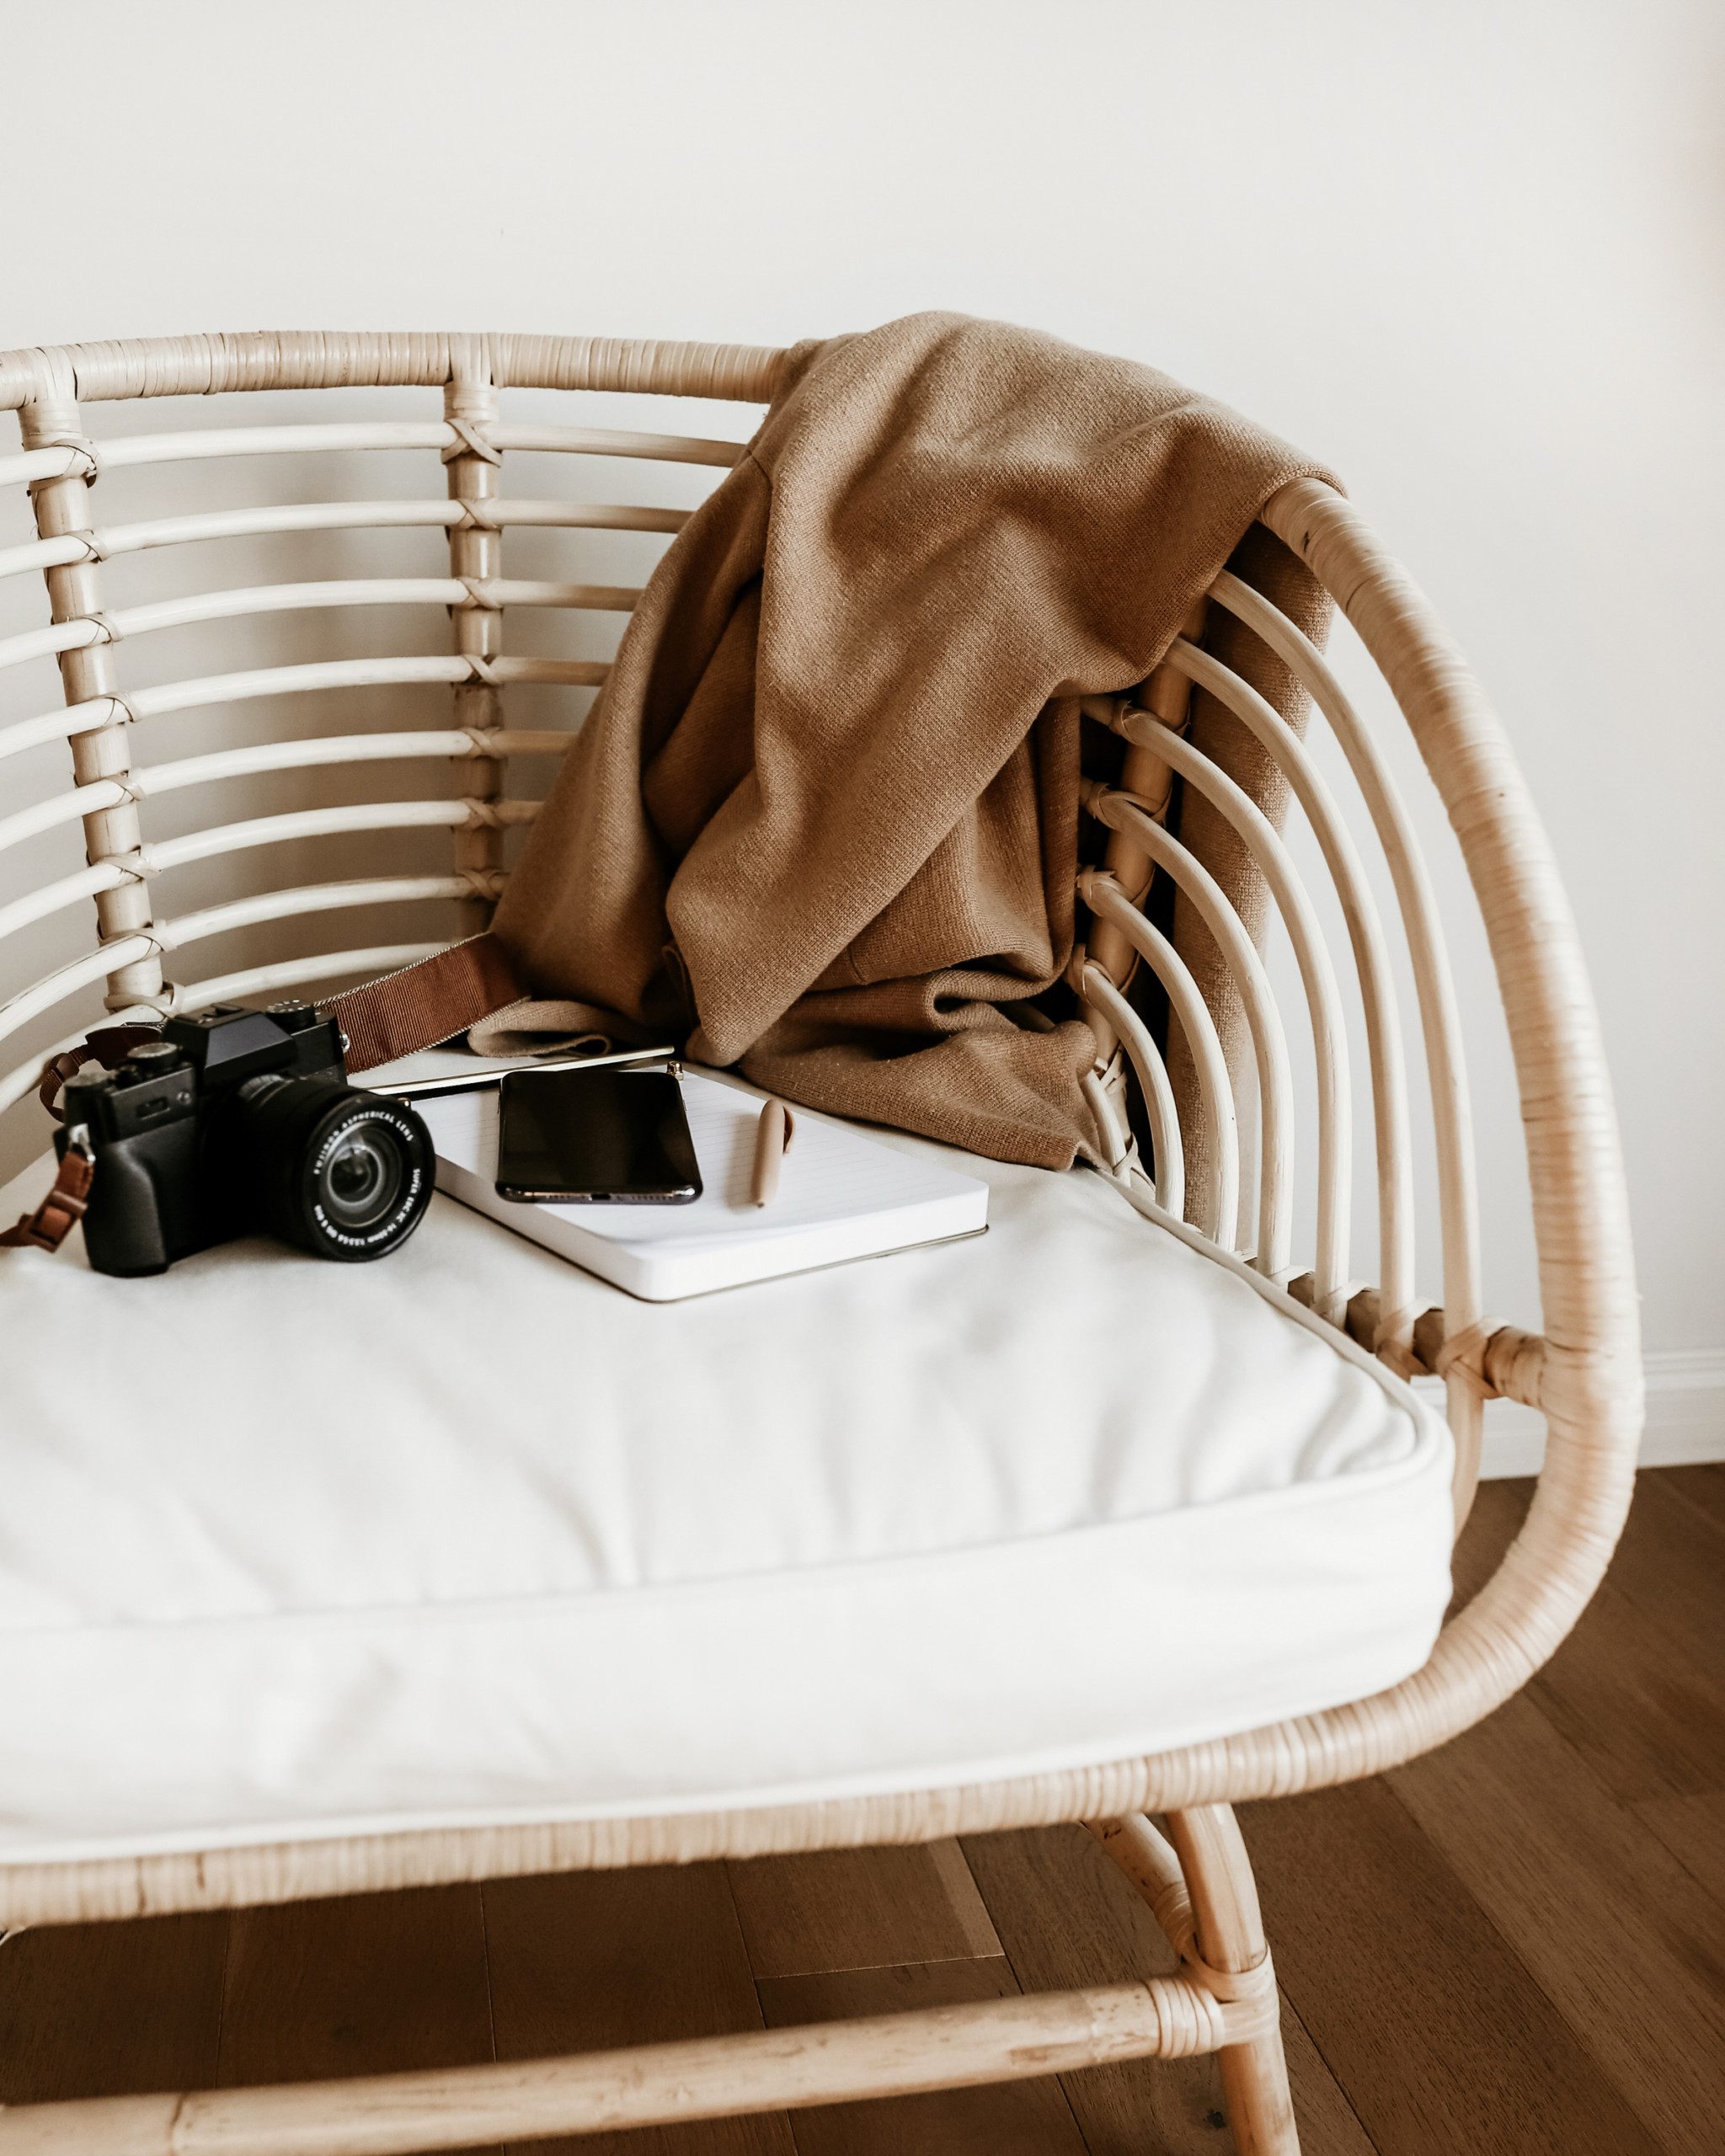 rattan chair with blanket, camera and notebook and pen sitting on top.